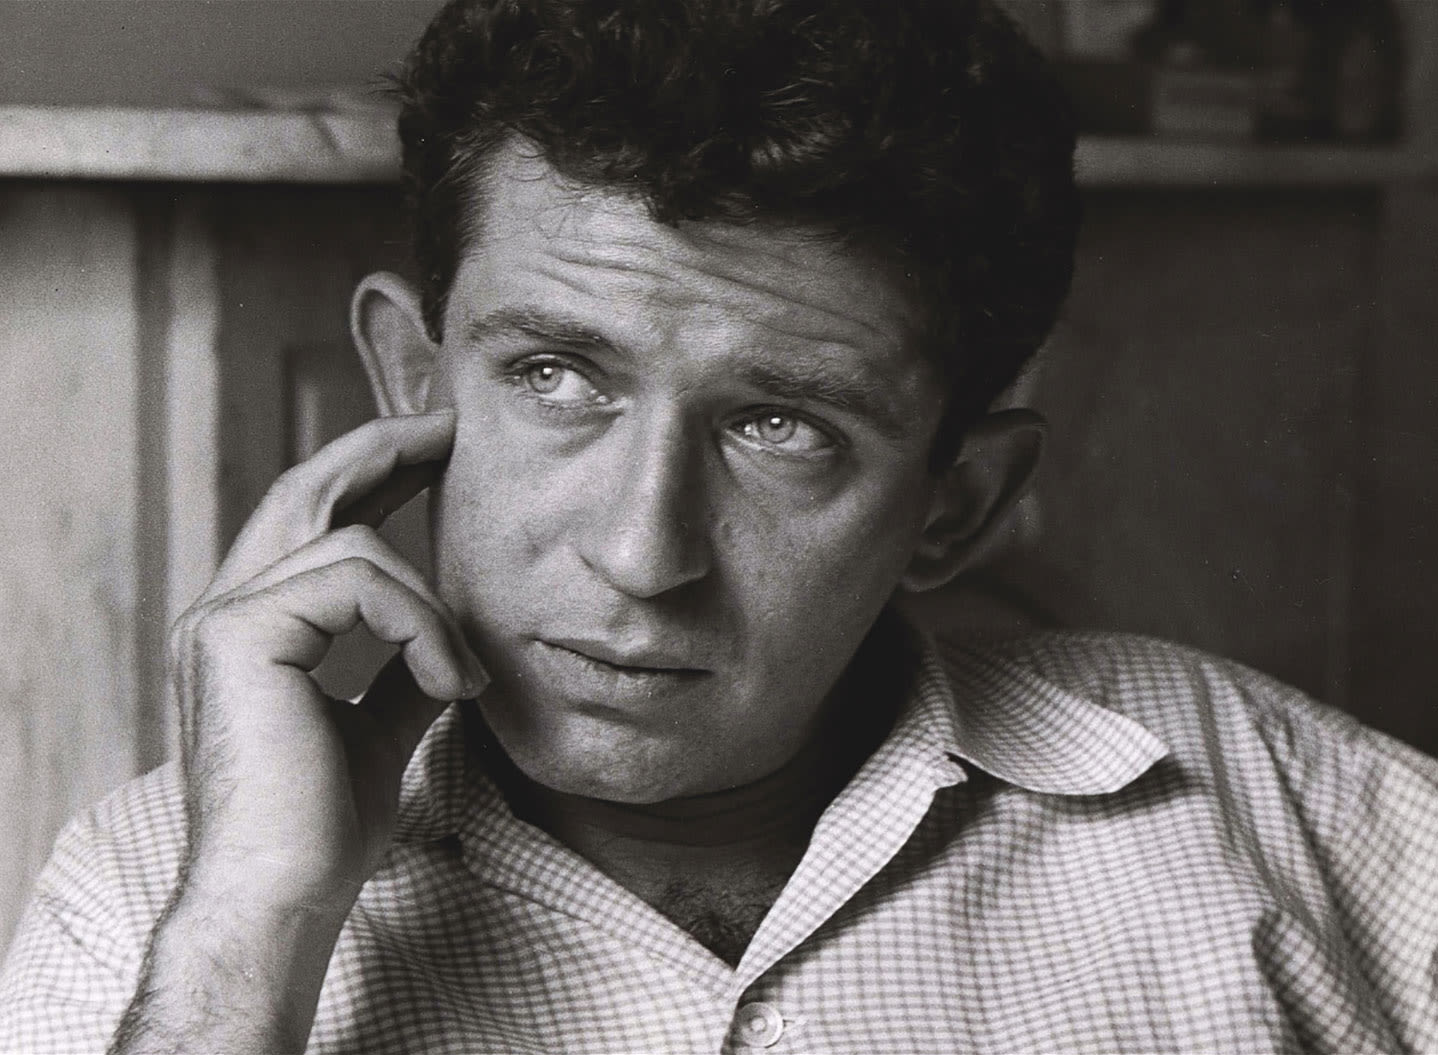 A New Film Summons Norman Mailer as One of Cancel Culture’s Formidable Foes